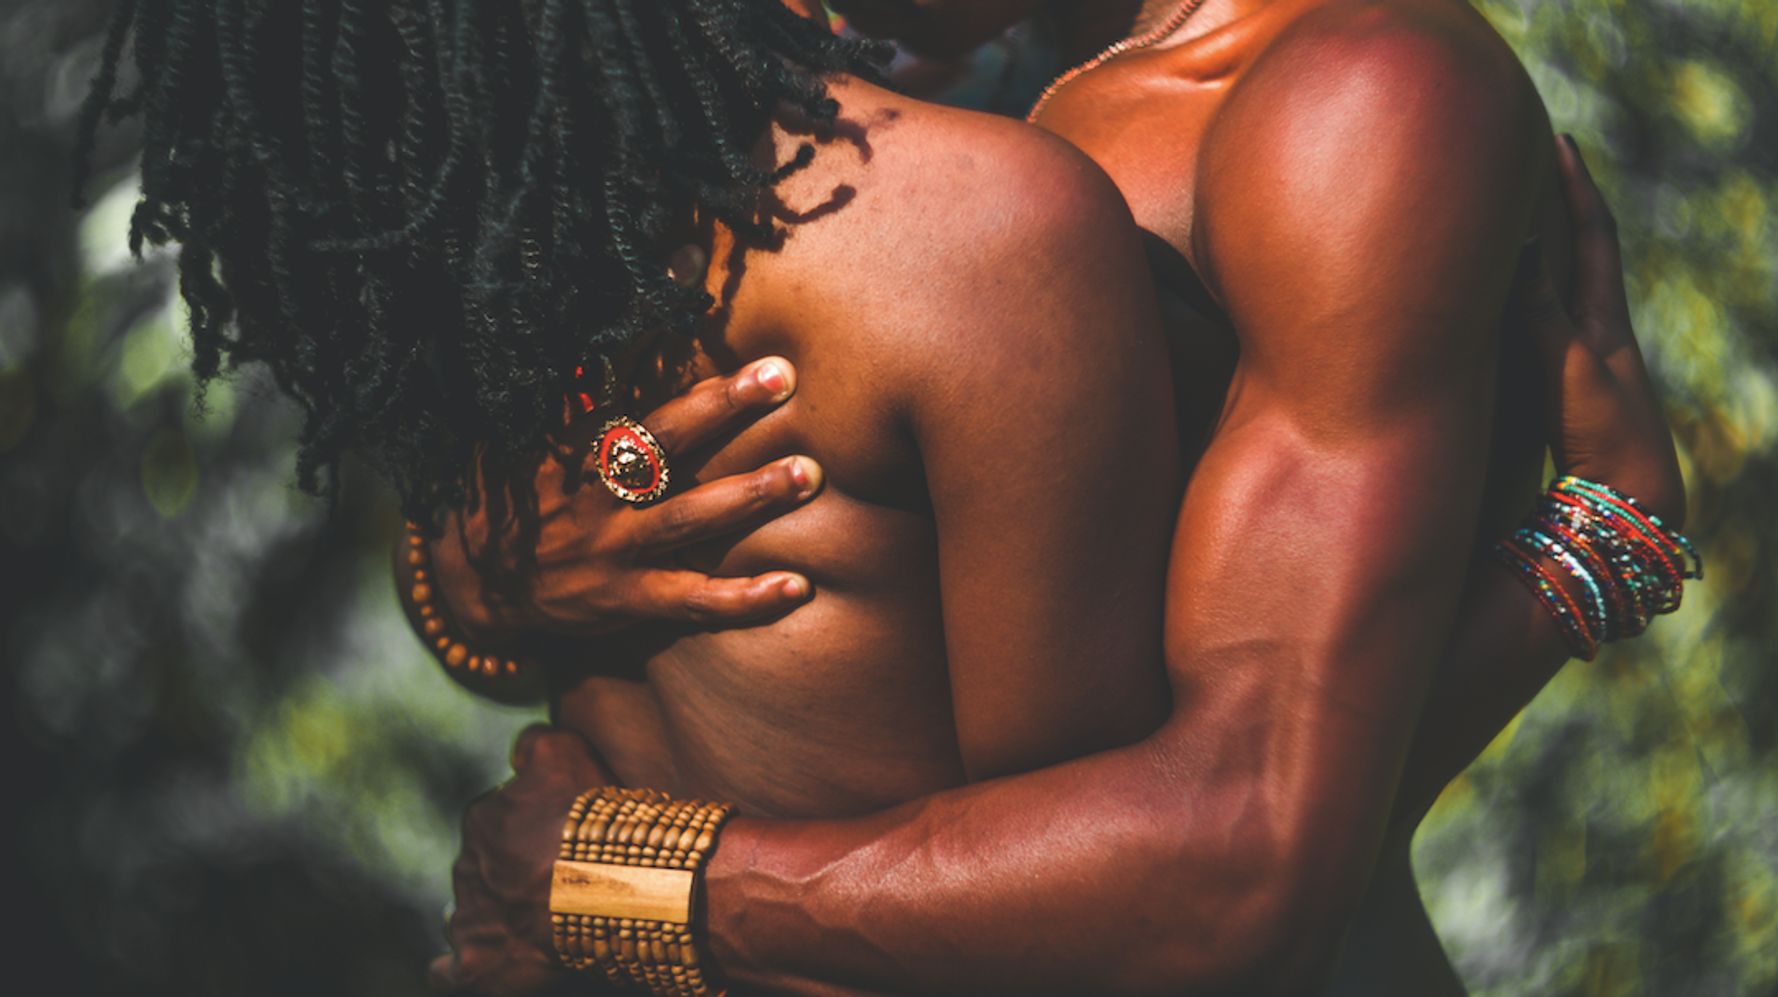 New Platform Promotes Images Of Black People Engaging In Acts Of Affection.